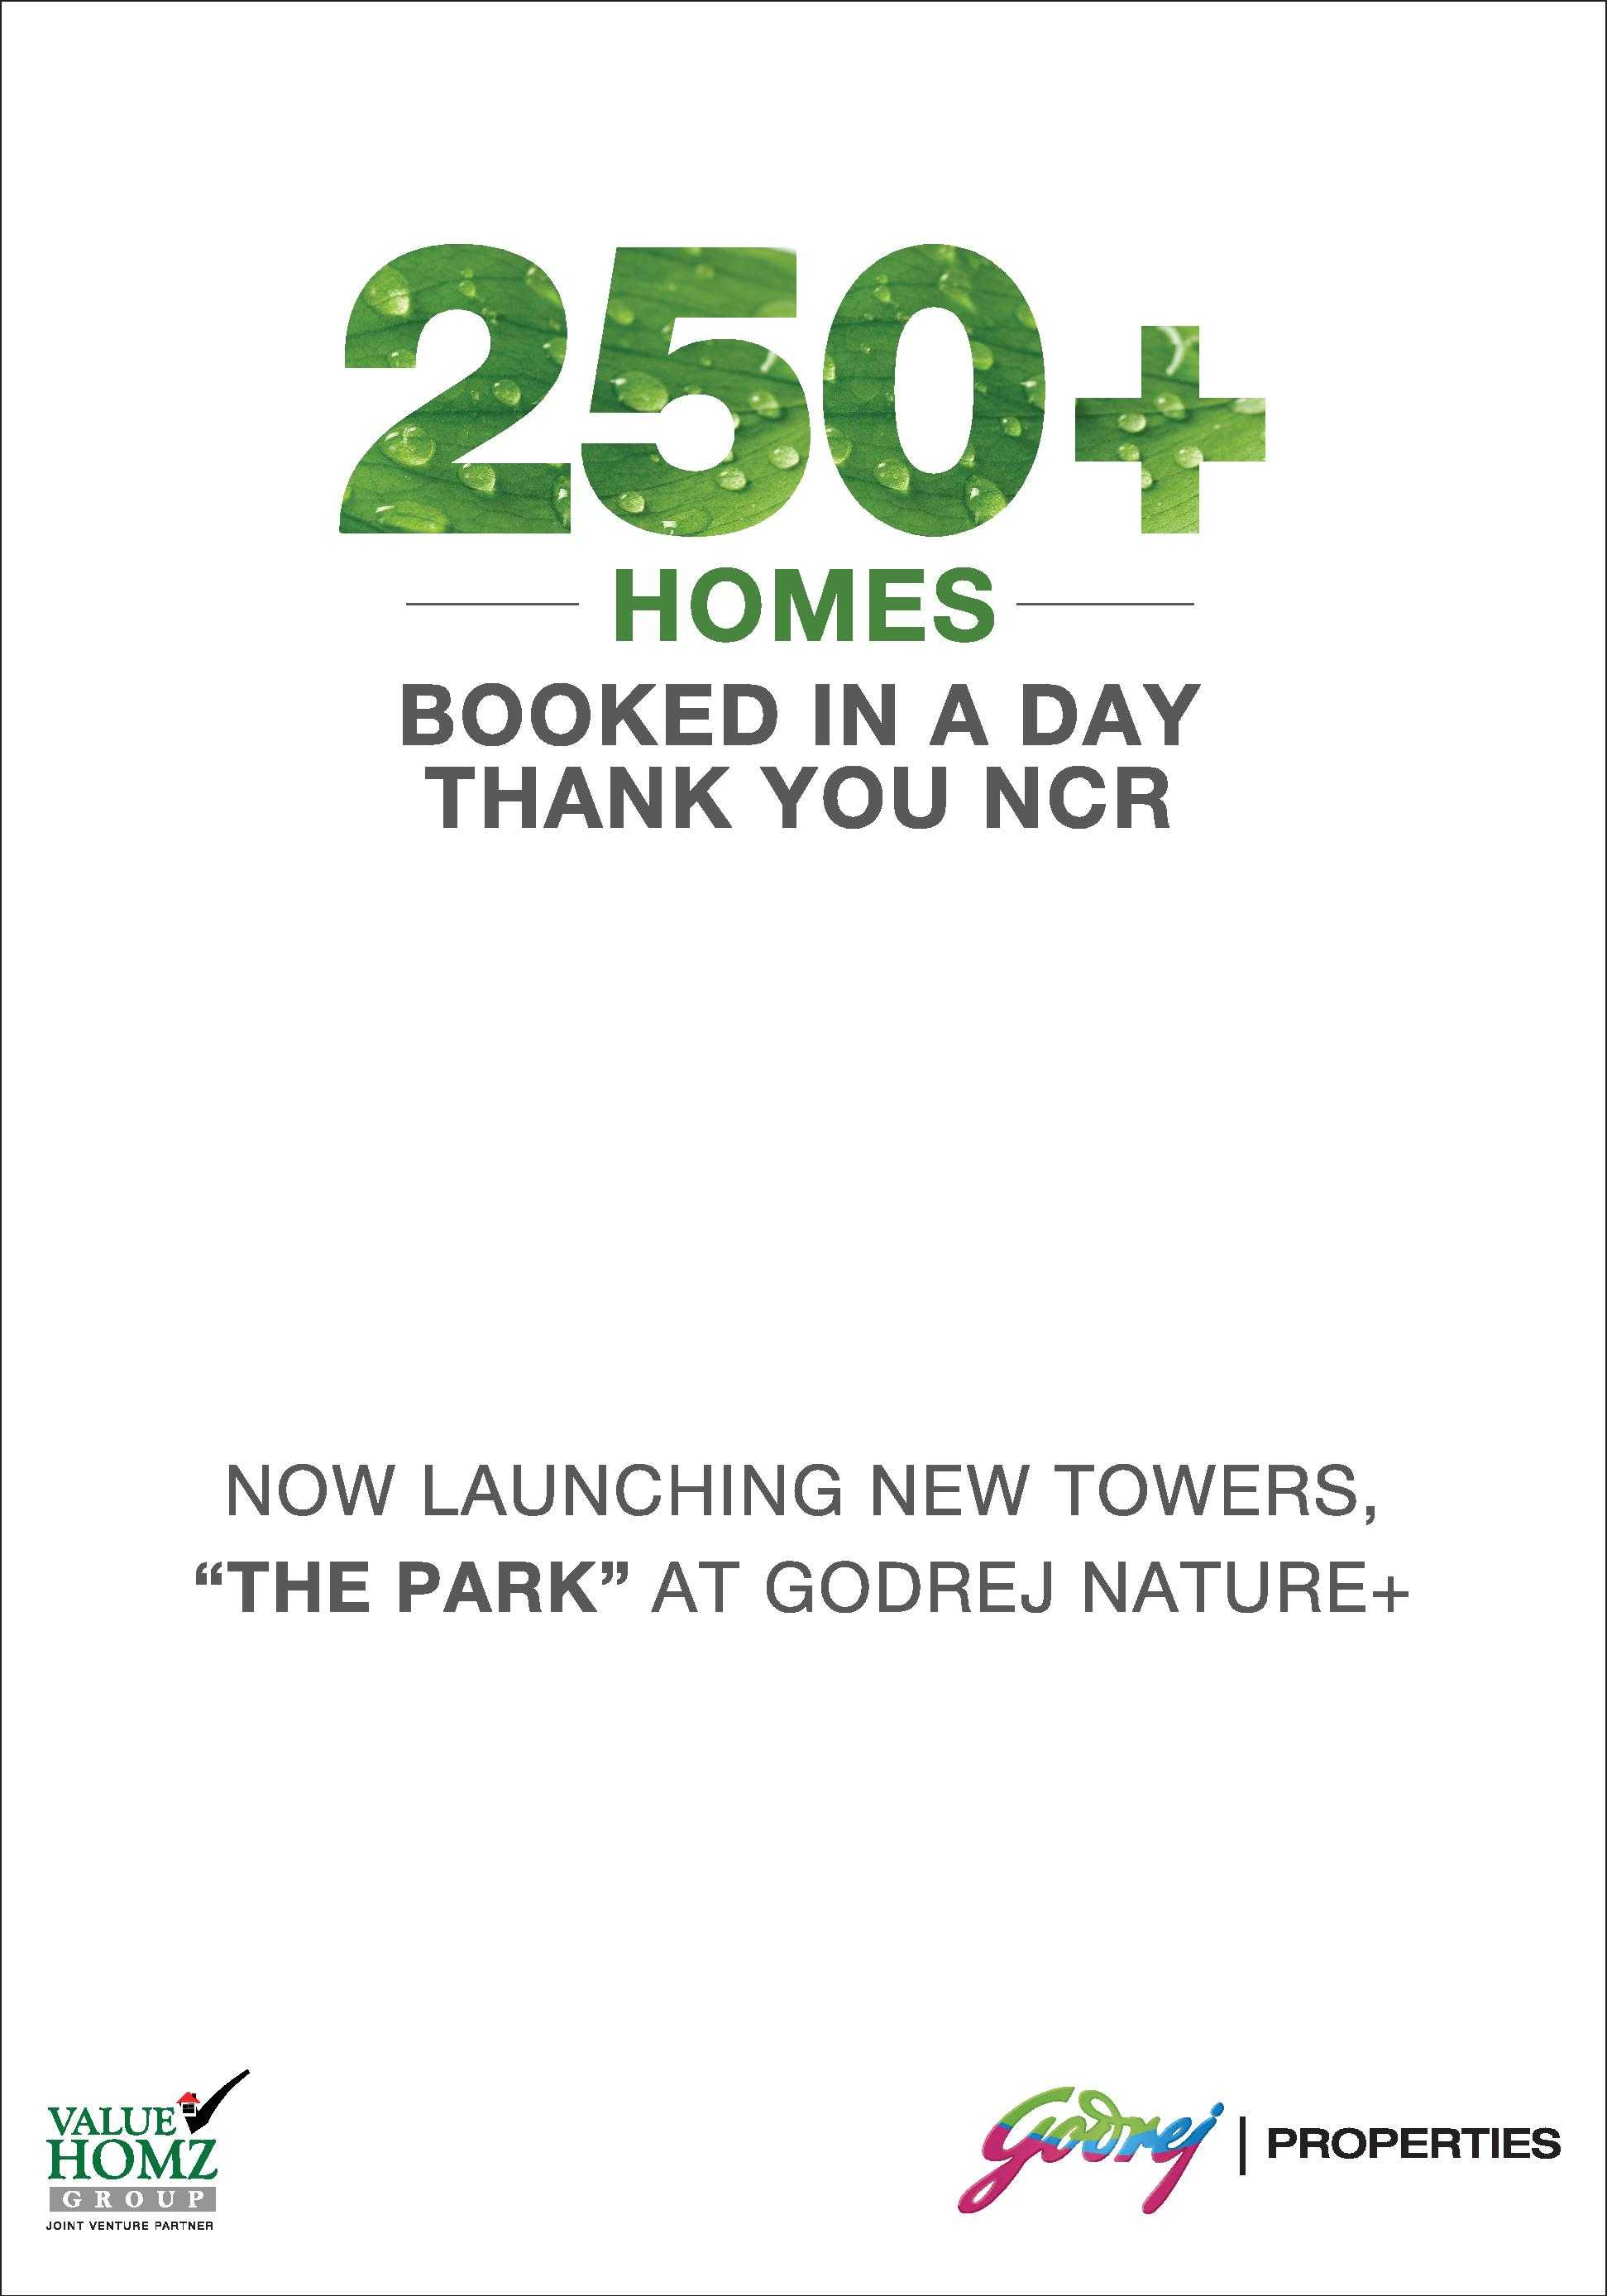 Launching new towers The Park at Godrej Nature Plus in Sohna Update